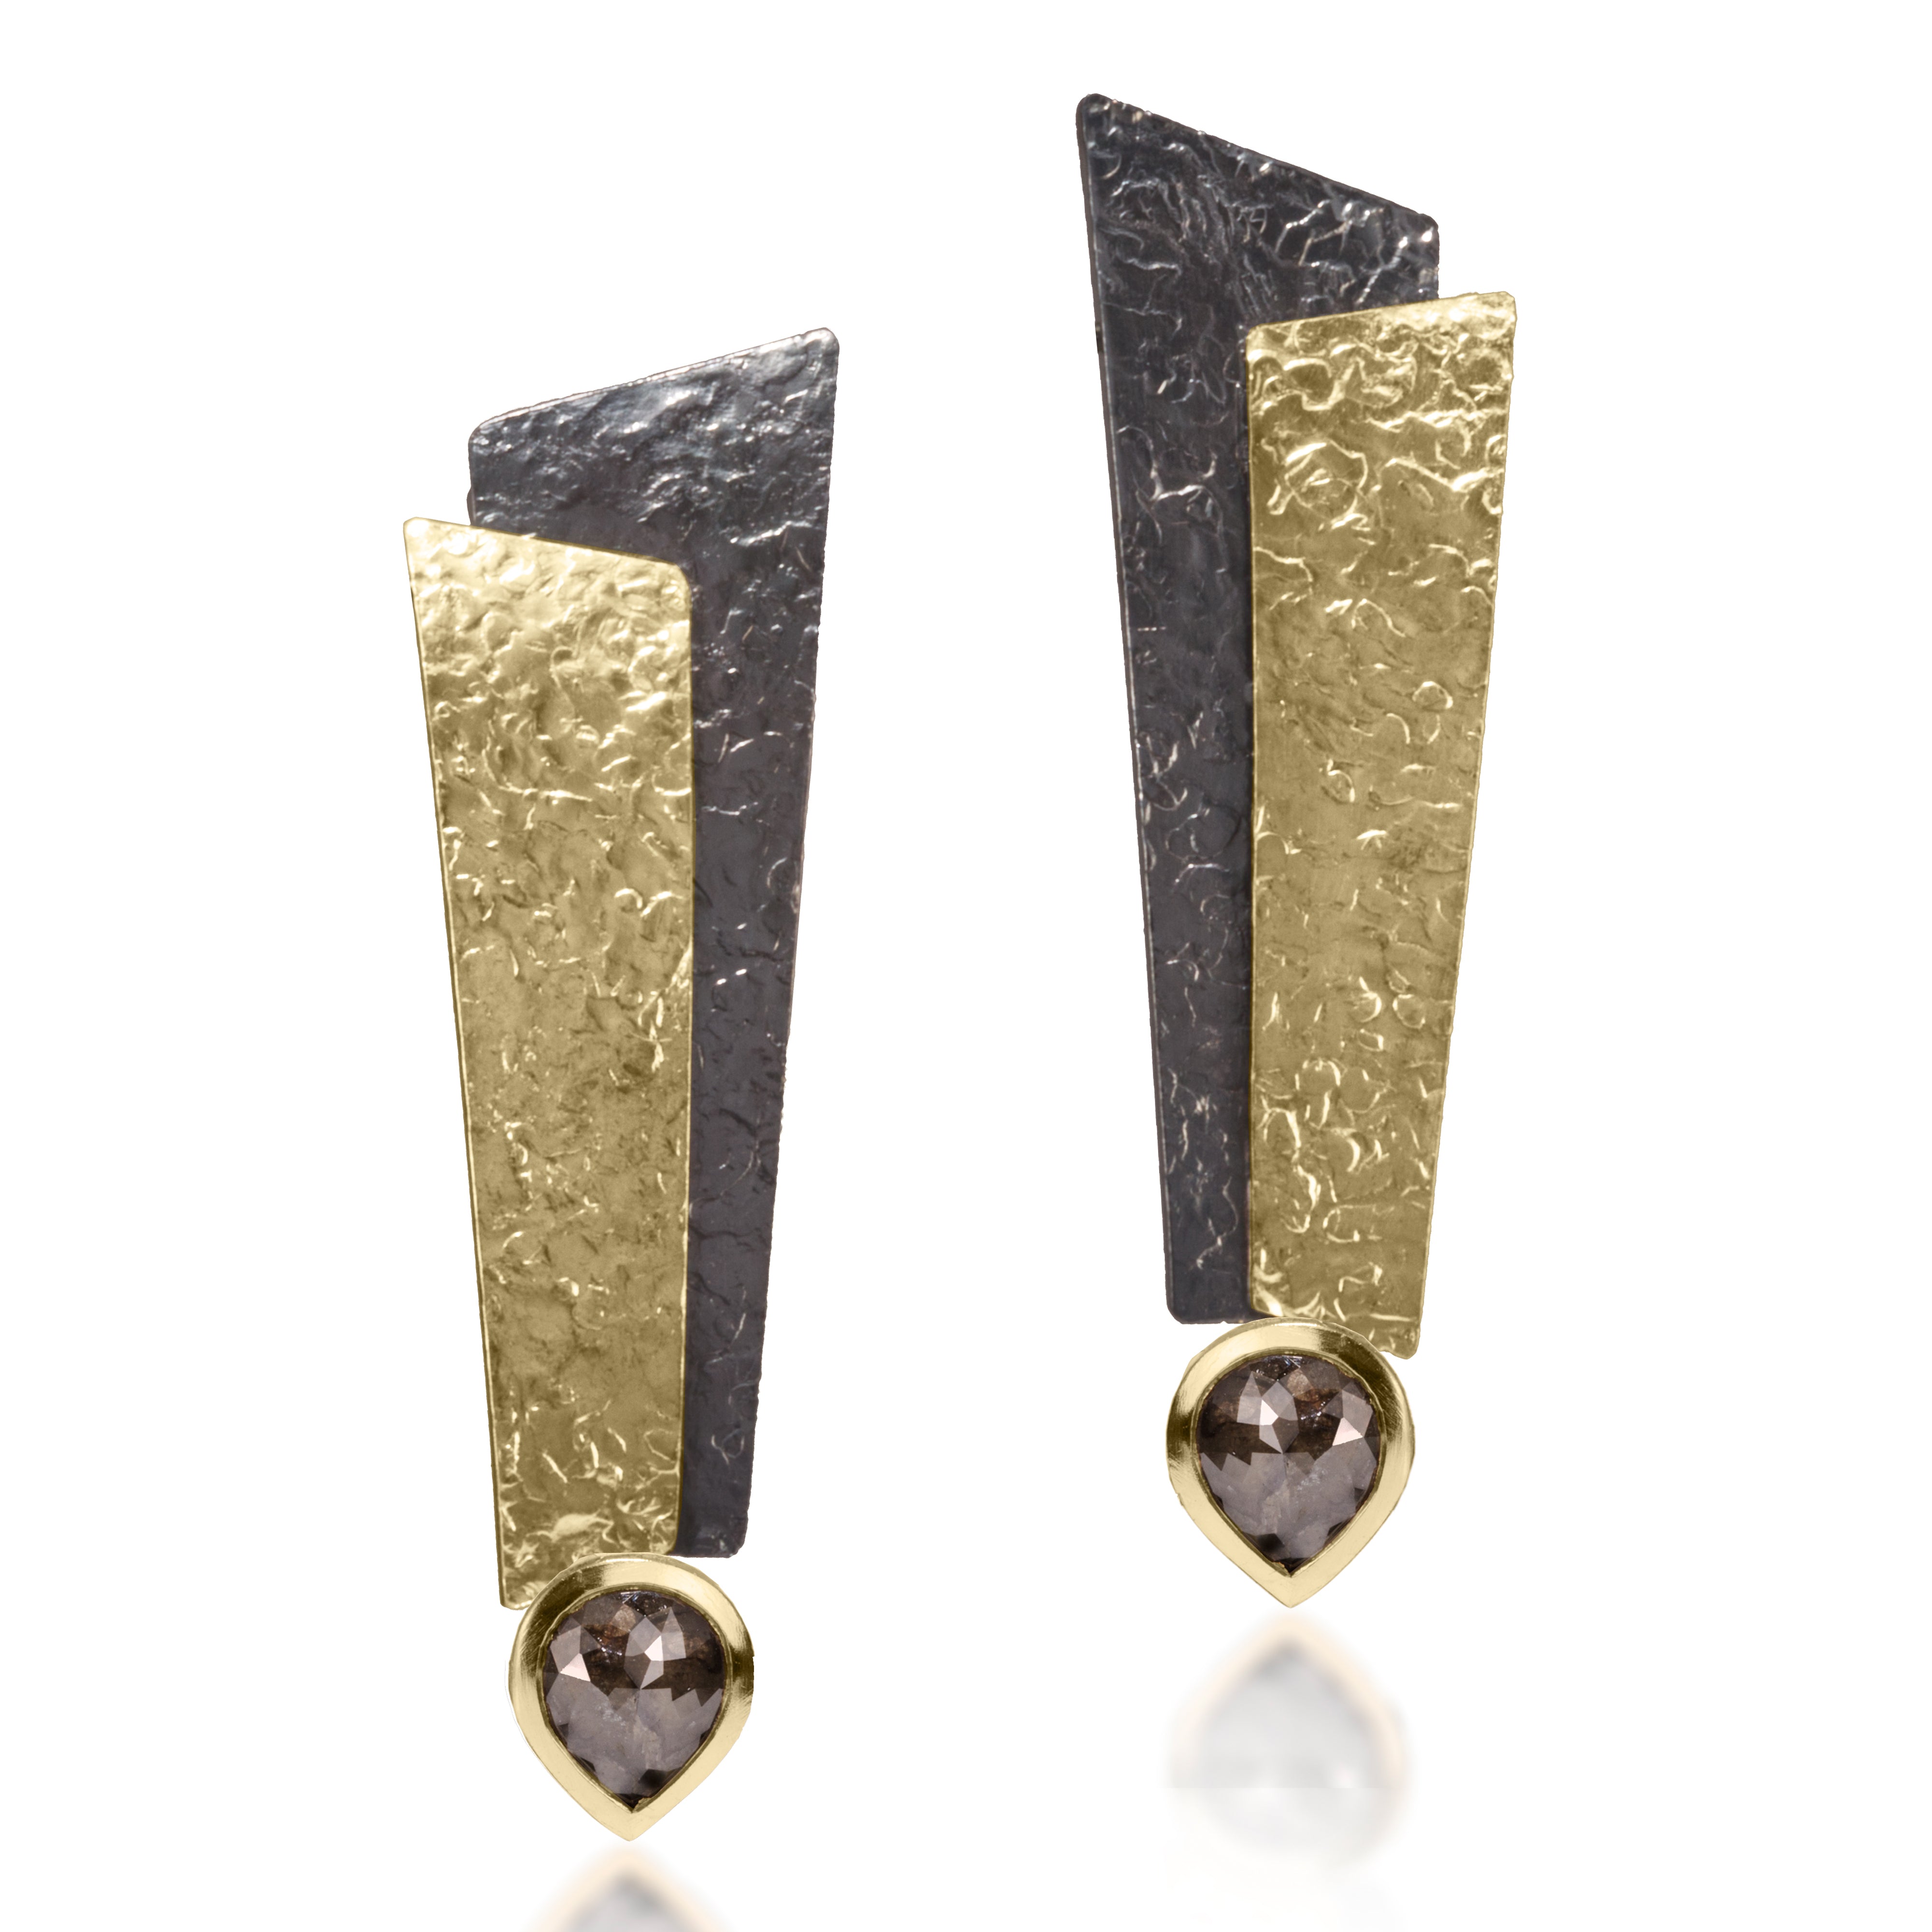 This dramatic earring has been created in 18k bi-metal and oxidized sterling silver accented with various bezel diamonds. Hand fabricated, hammer textured with house fabricated lever backs. tcw. varies by design.